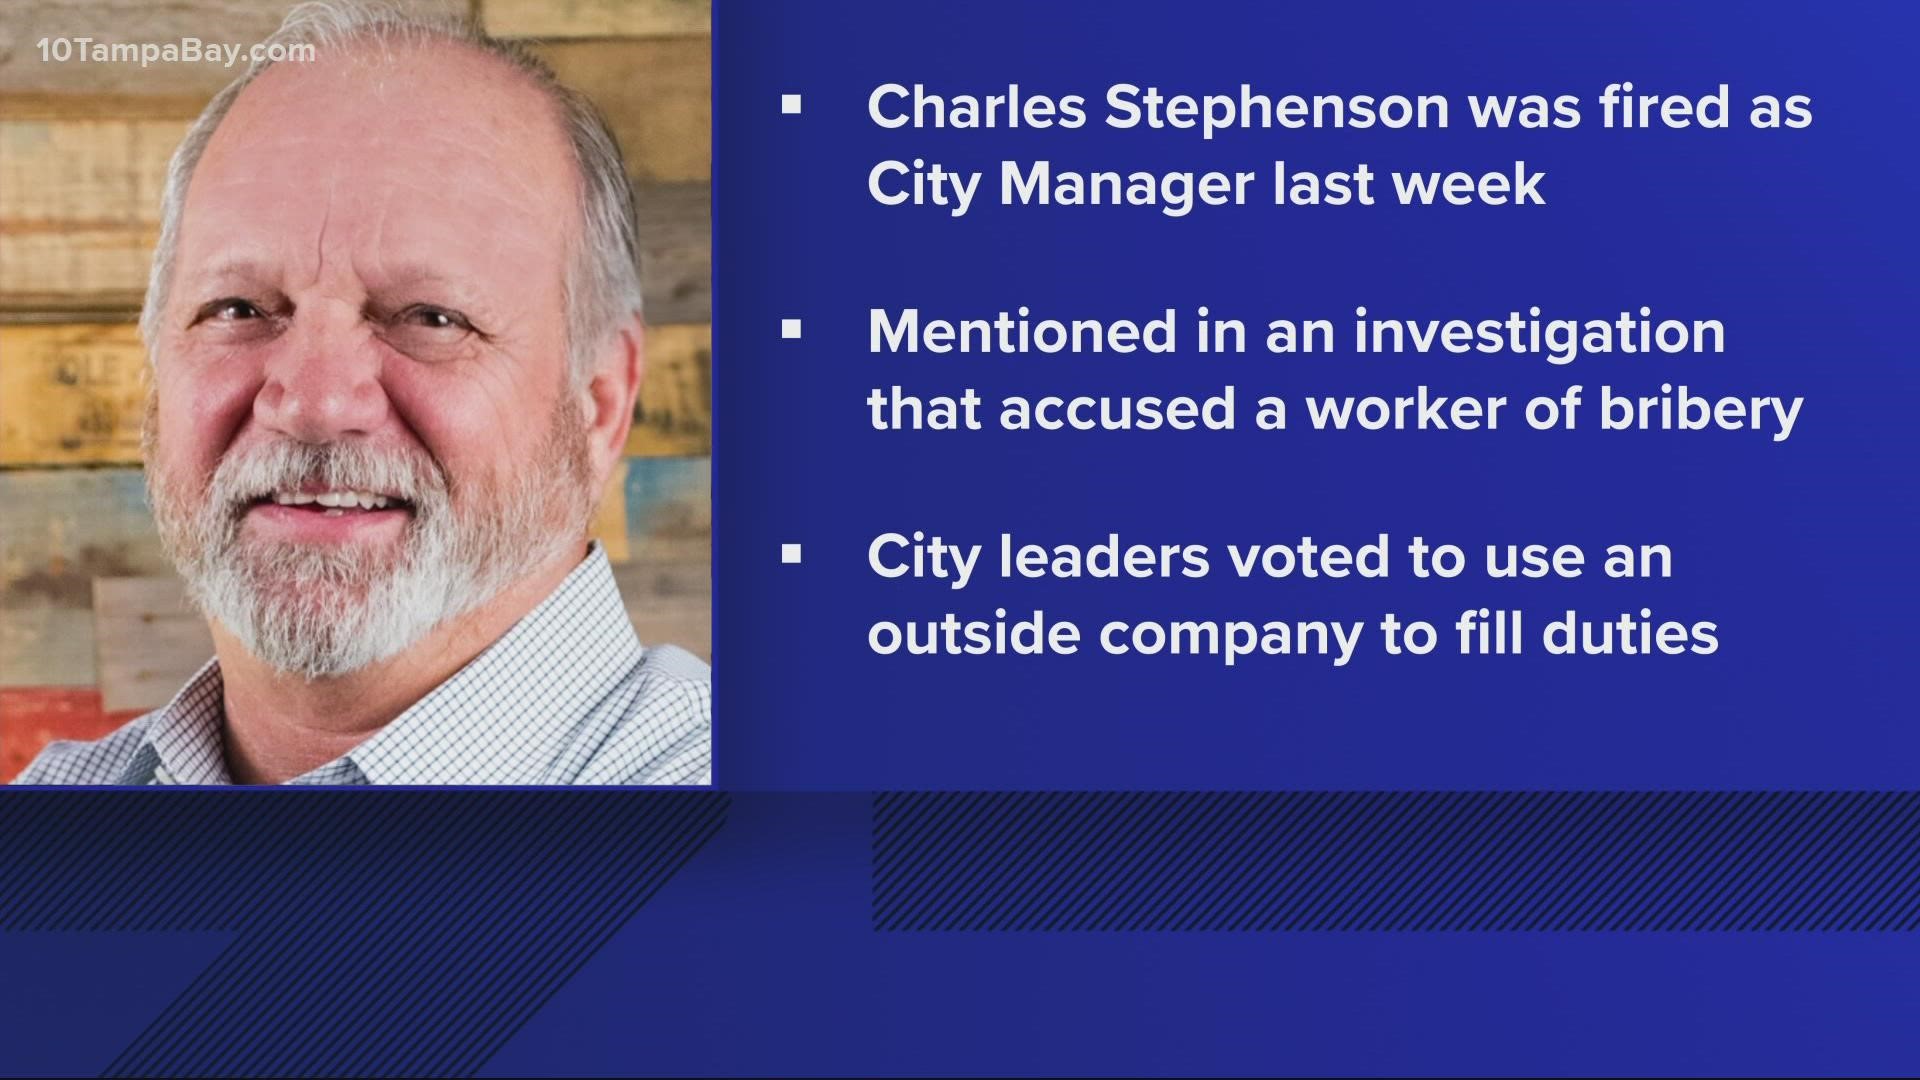 Former Temple Terrace City Manager Charles Stephenson was fired last week.